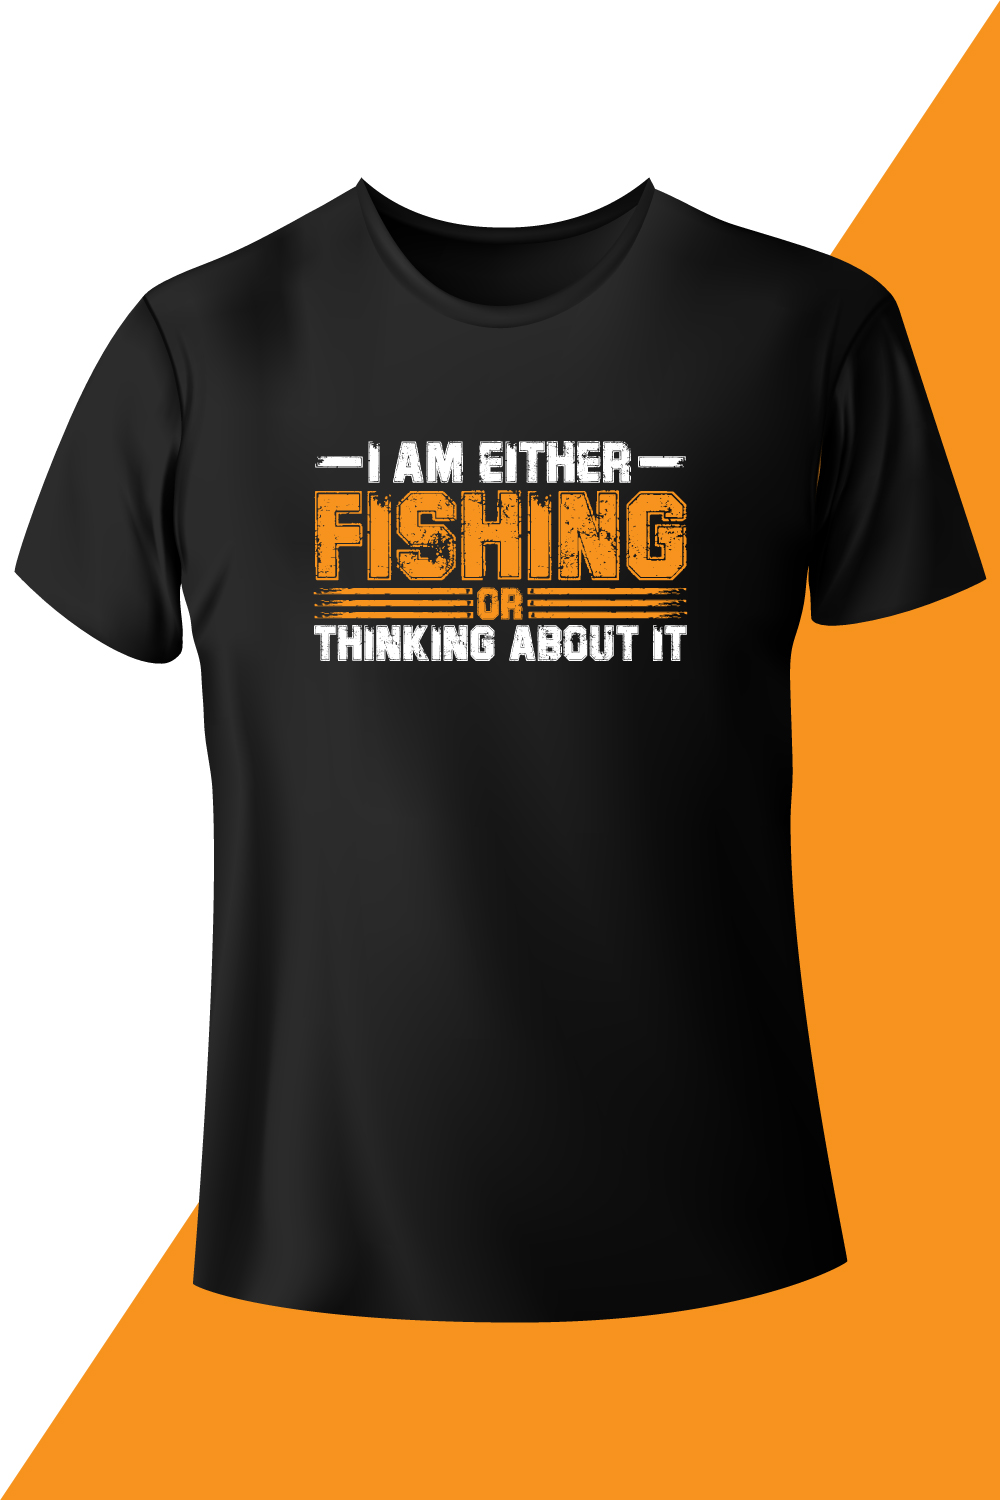 Image with a black t-shirt with a wonderful inscription i am either fishing or thinking about it.